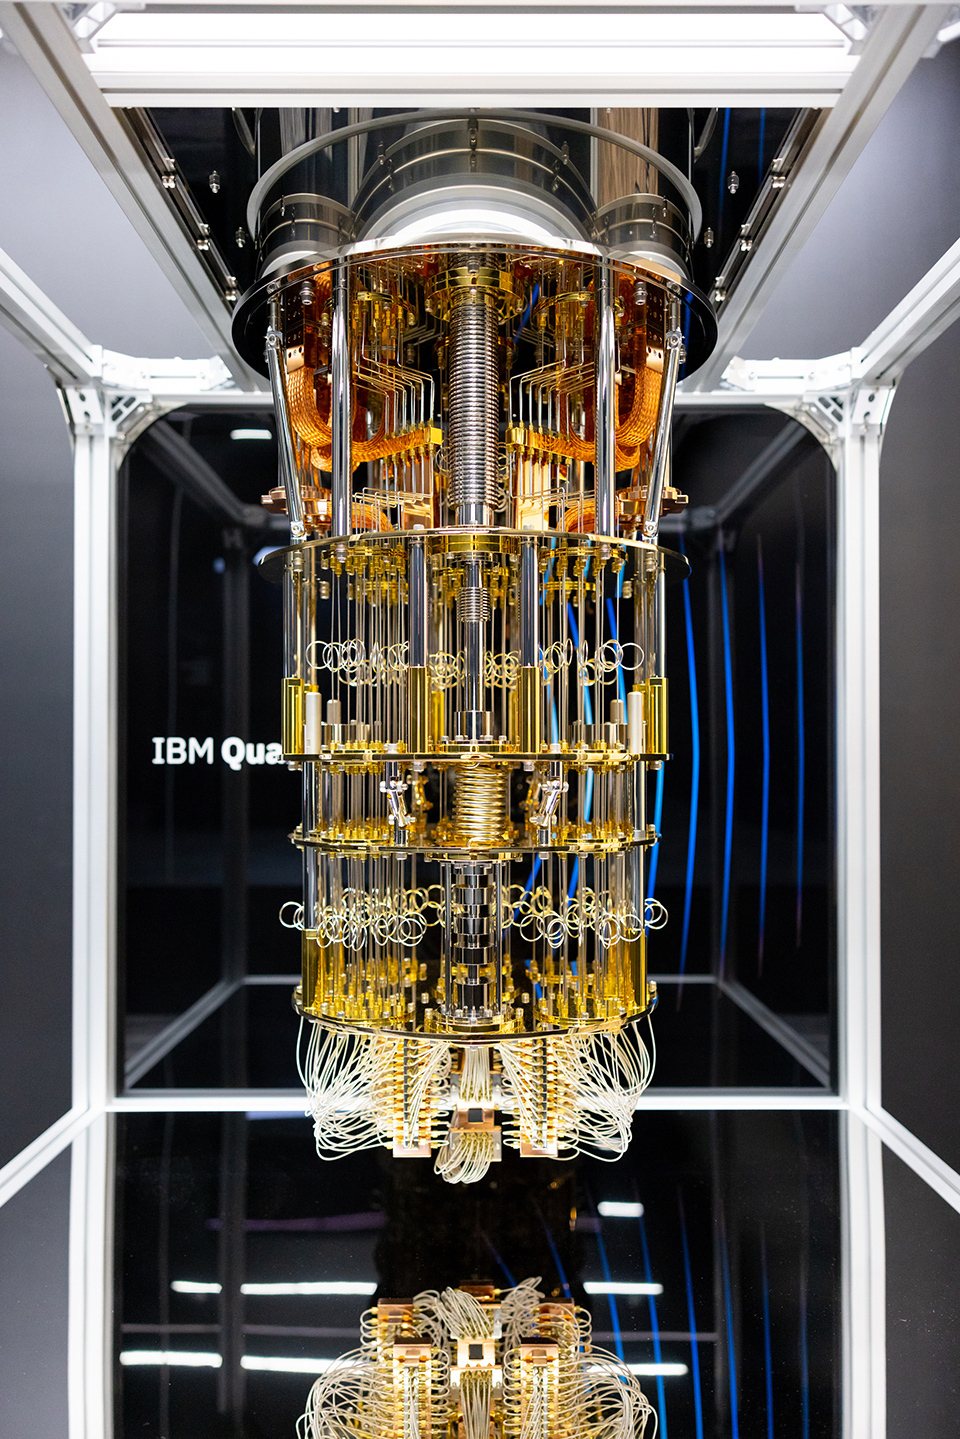 A quantum computer showing a complex design with multiple layers of gold cylindrical plates and connectors.